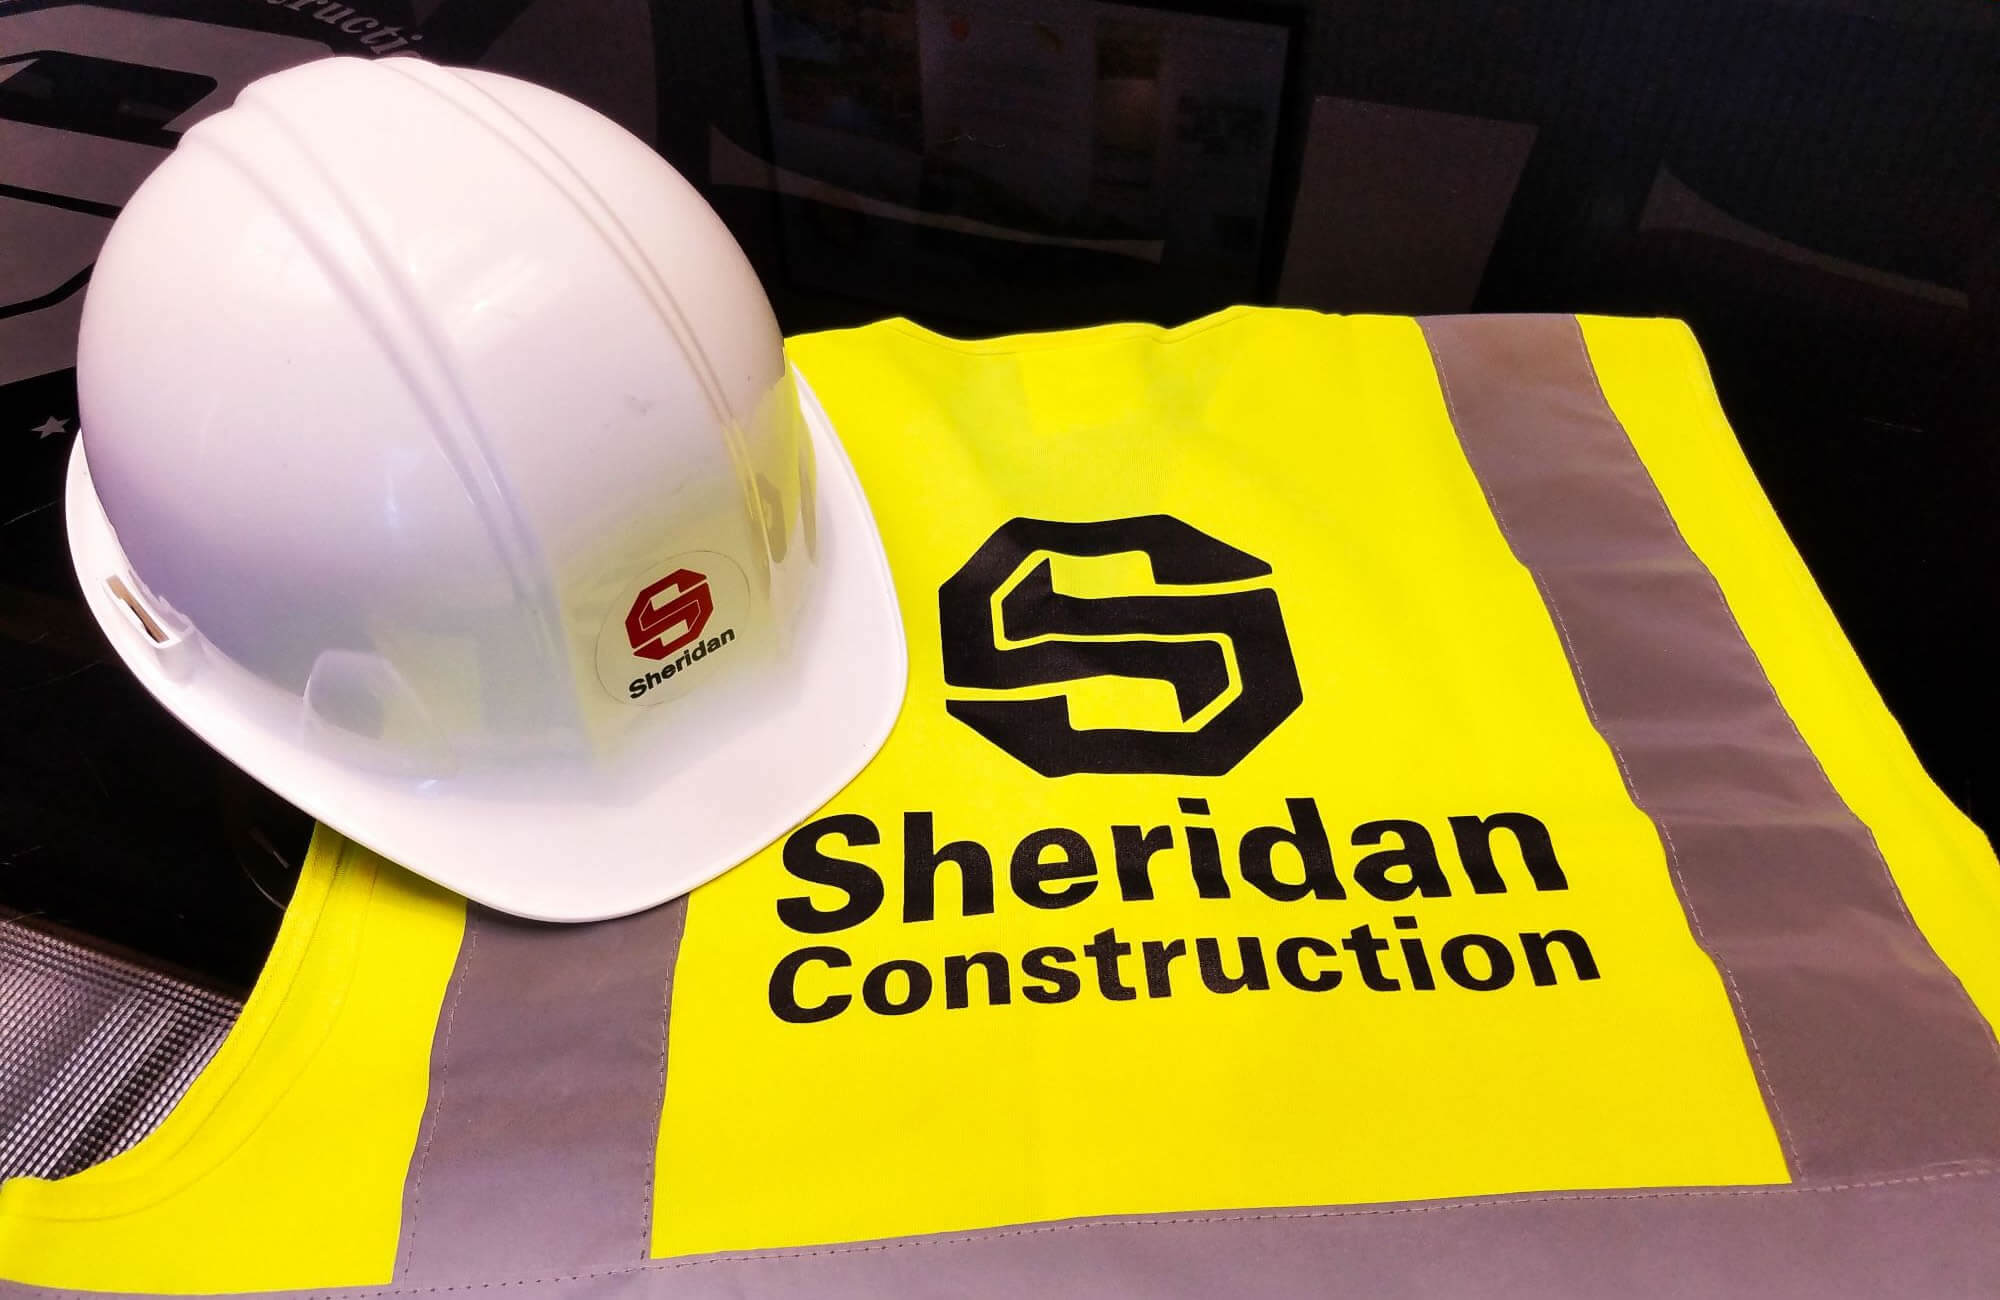 Sheridan Construction safety vest and hard hat.